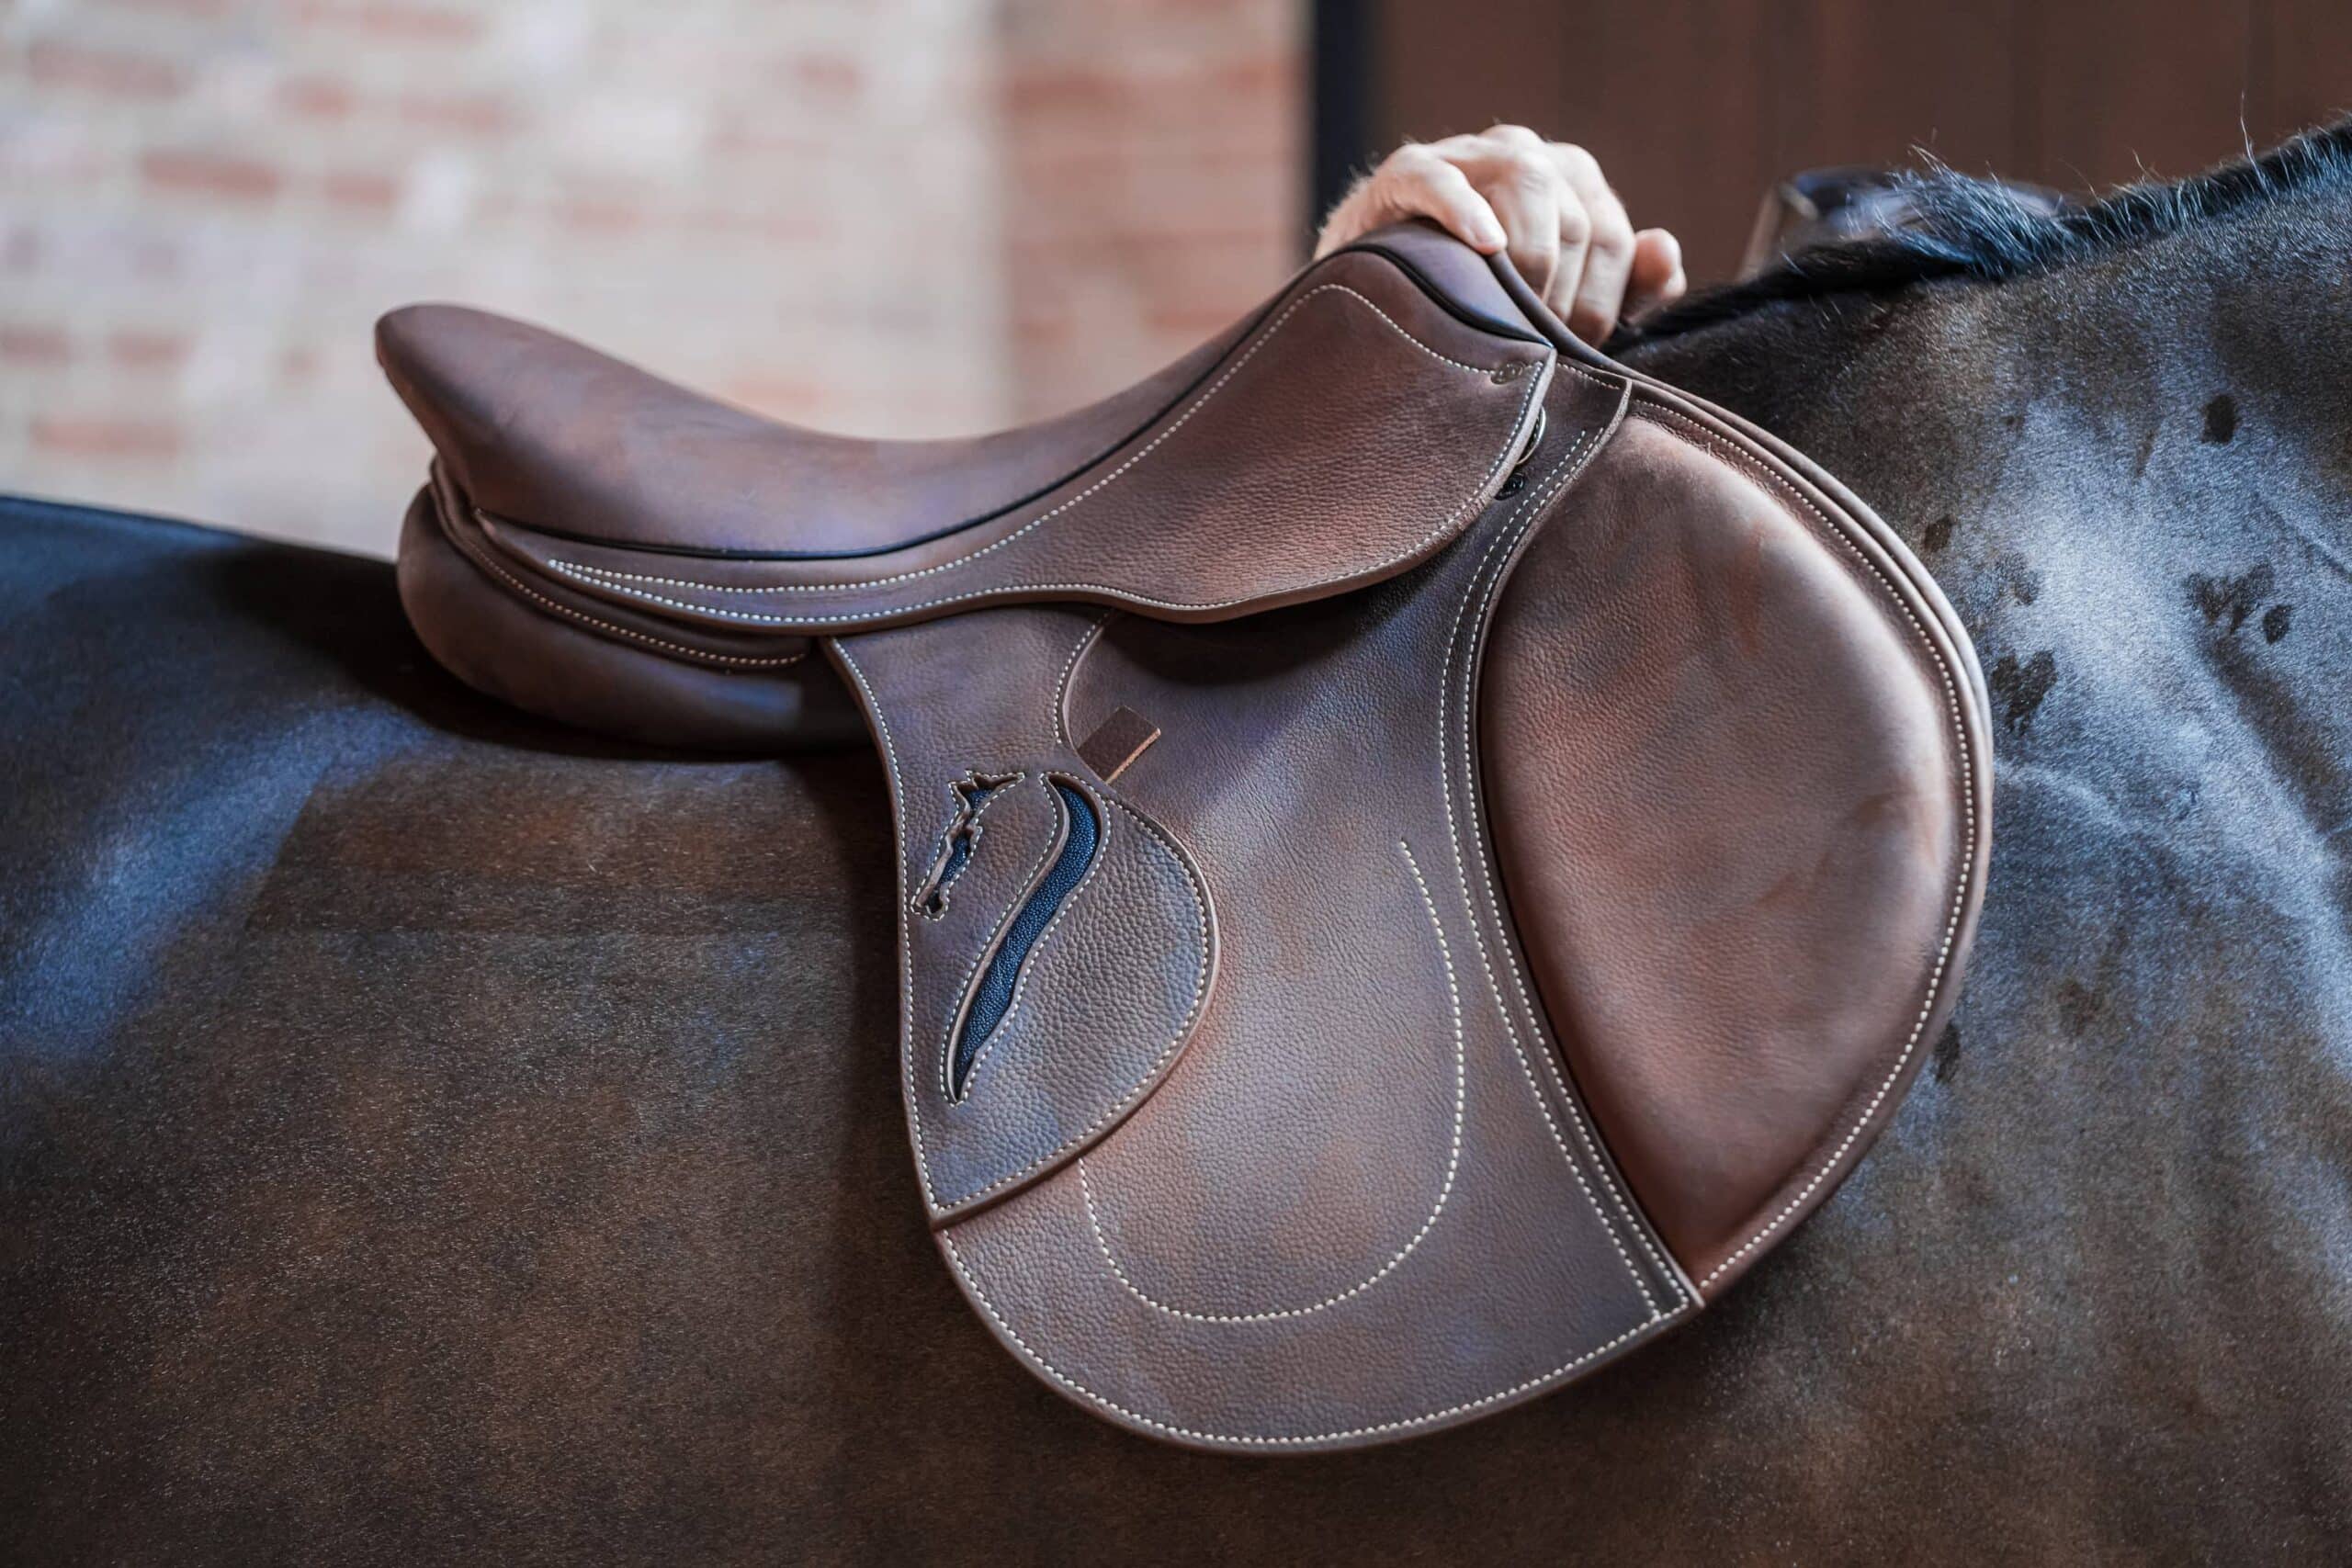 Maison Antarès Sellier - custom-made leather saddle for the horse and rider in the practice of horse riding